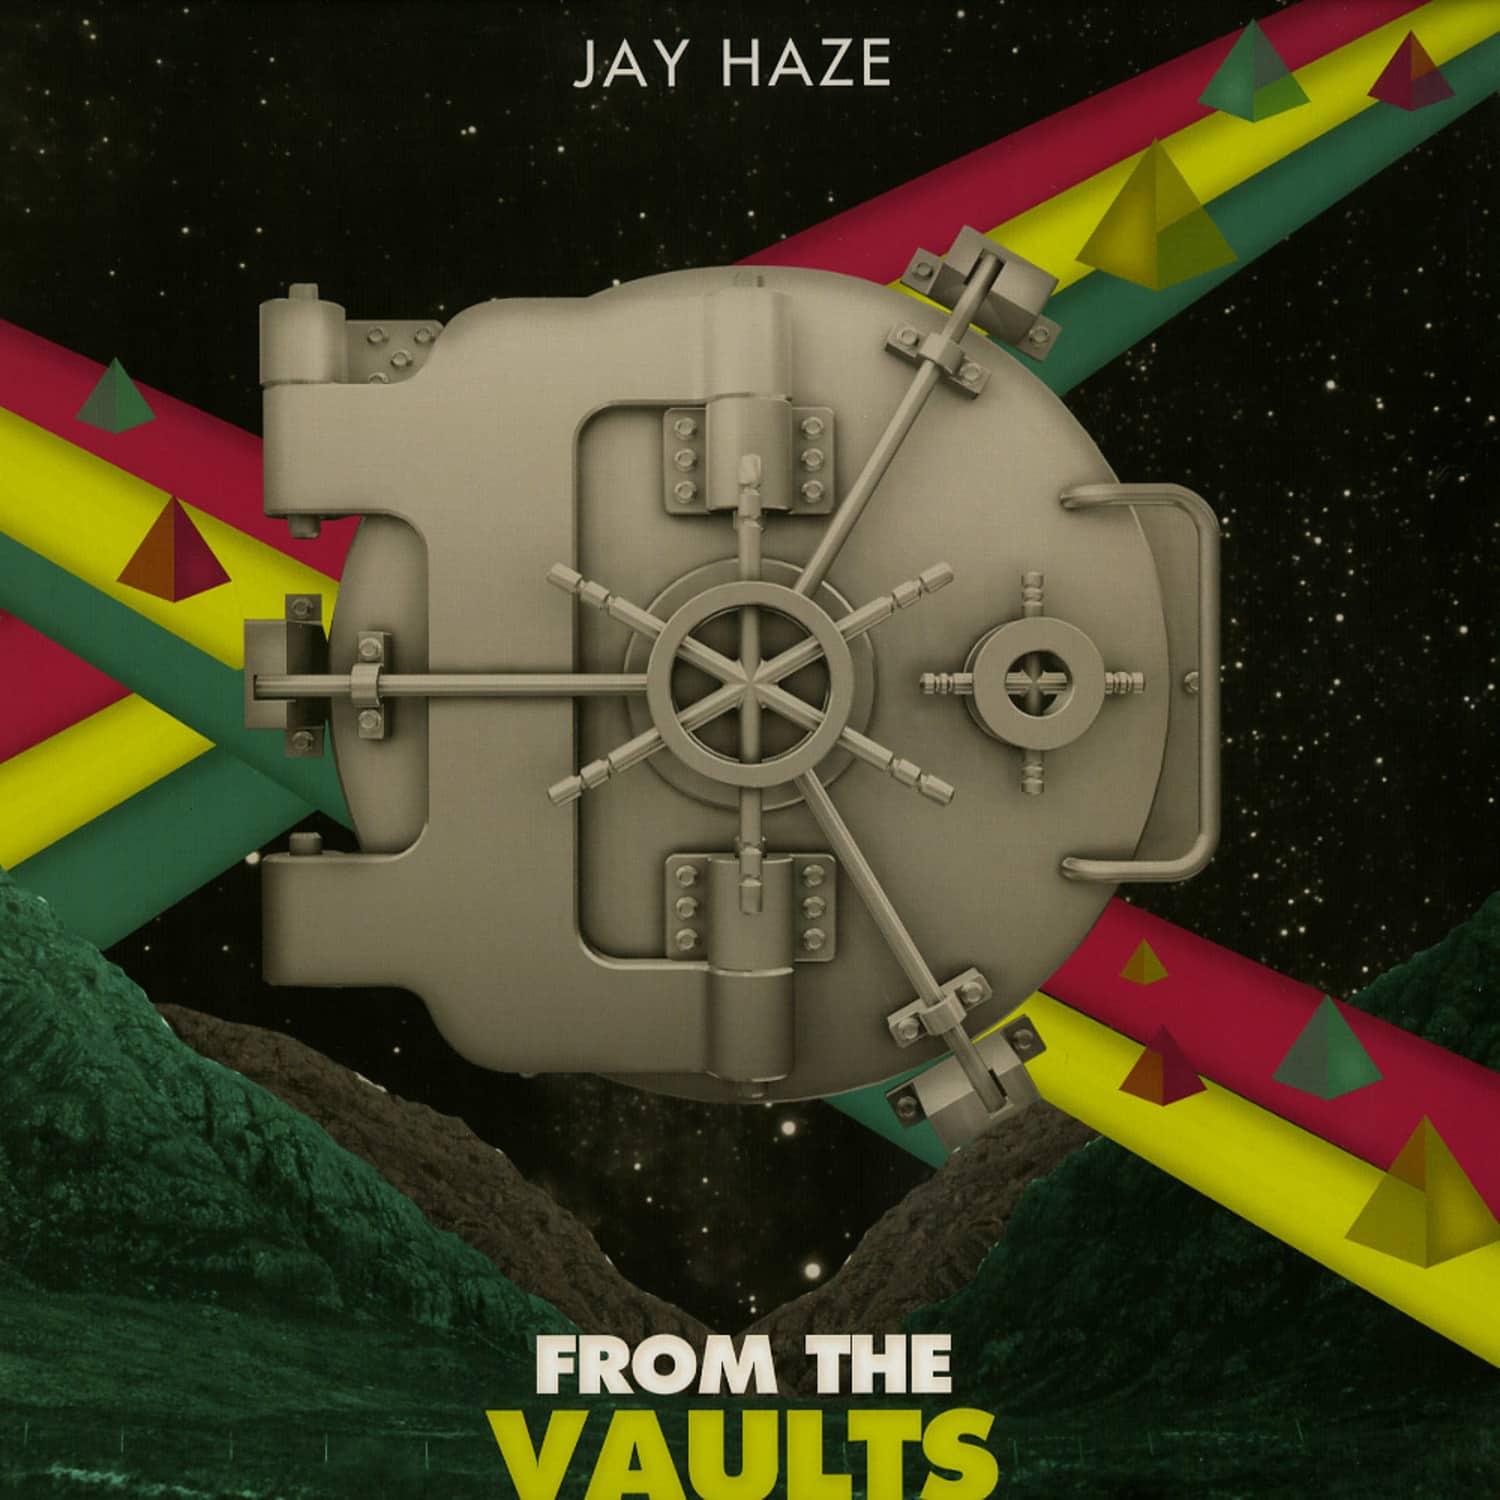 Jay Haze - FROM THE VAULTS EP